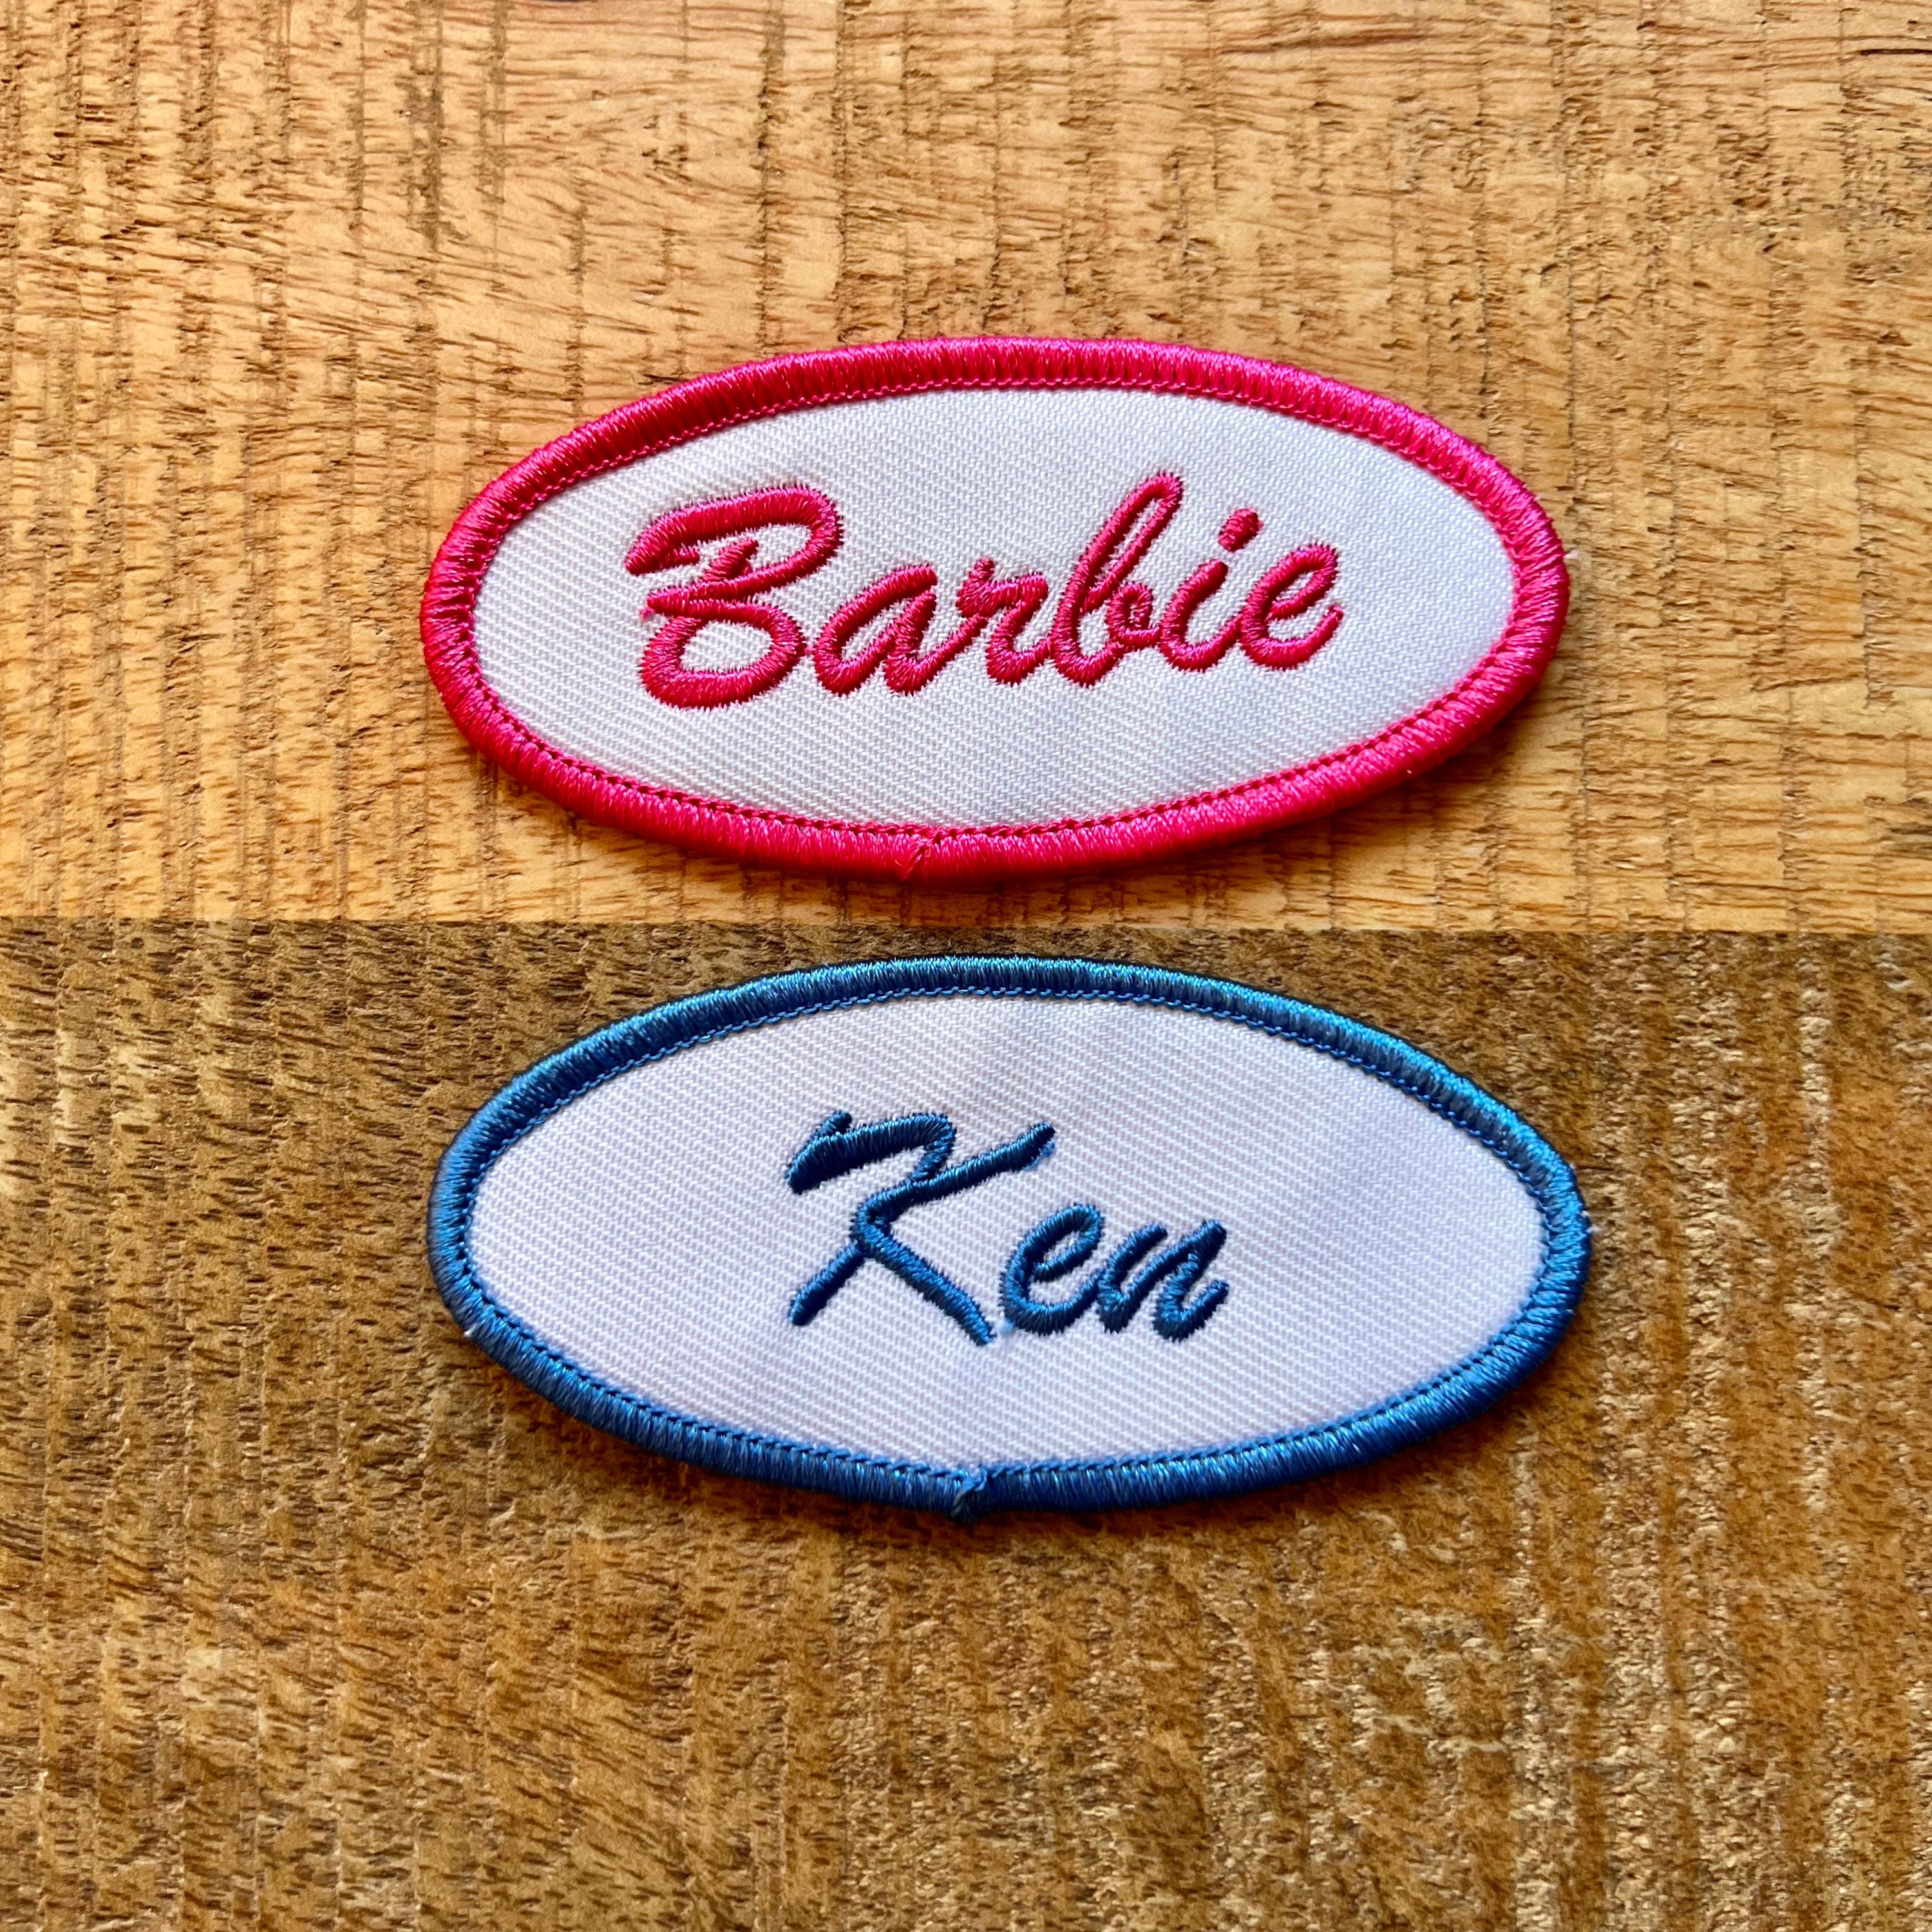 This Barbie is a scout”, I Dream, Believe & Lead! – Mad About Patches